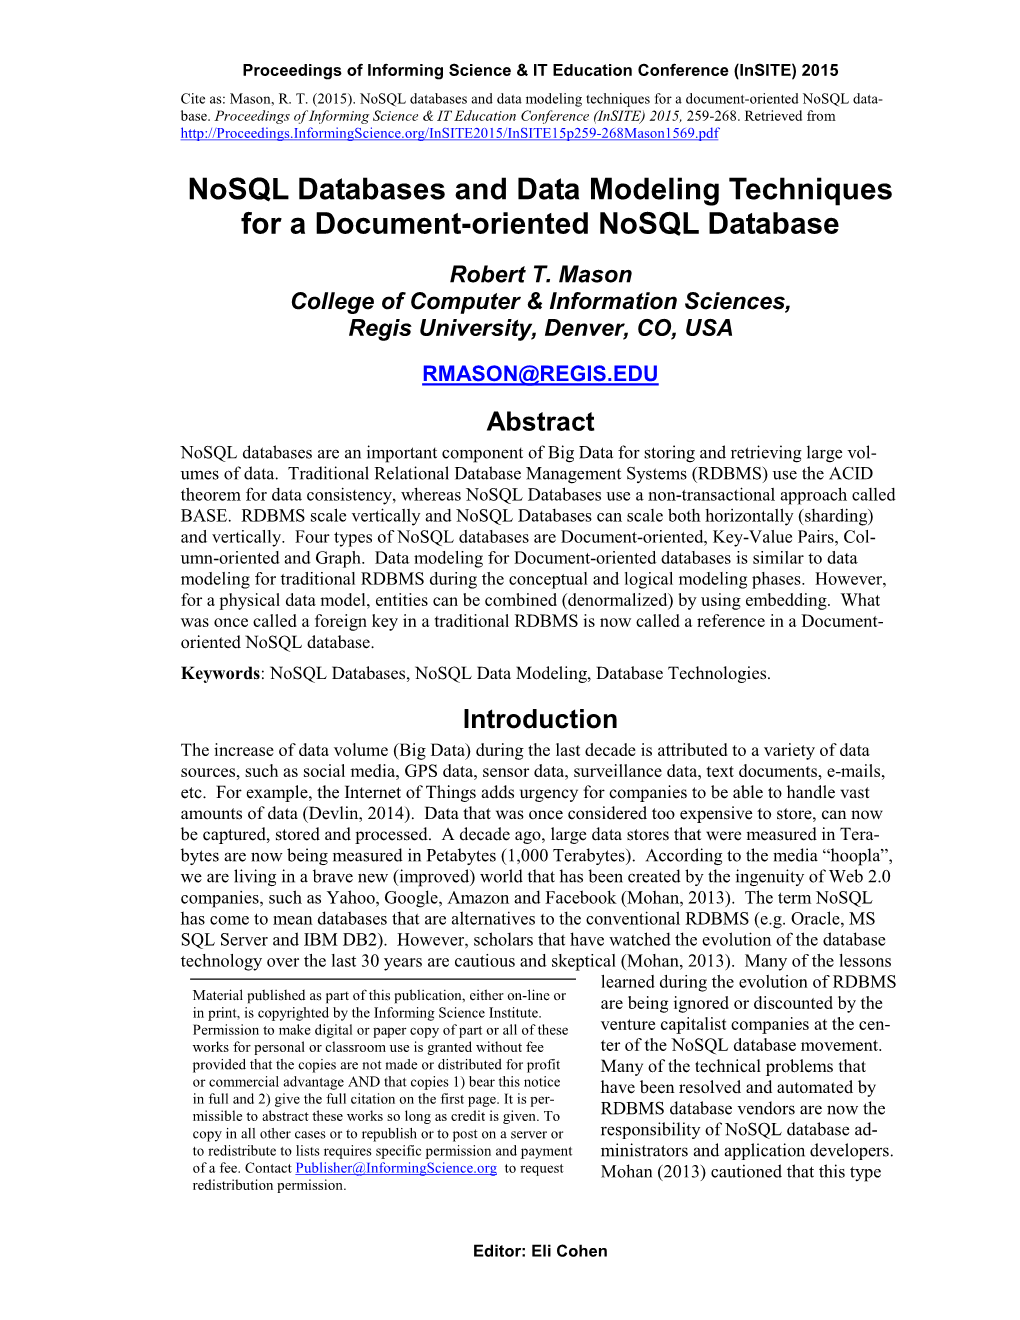 Nosql Databases and Data Modeling Techniques for a Document-Oriented Nosql Data- Base